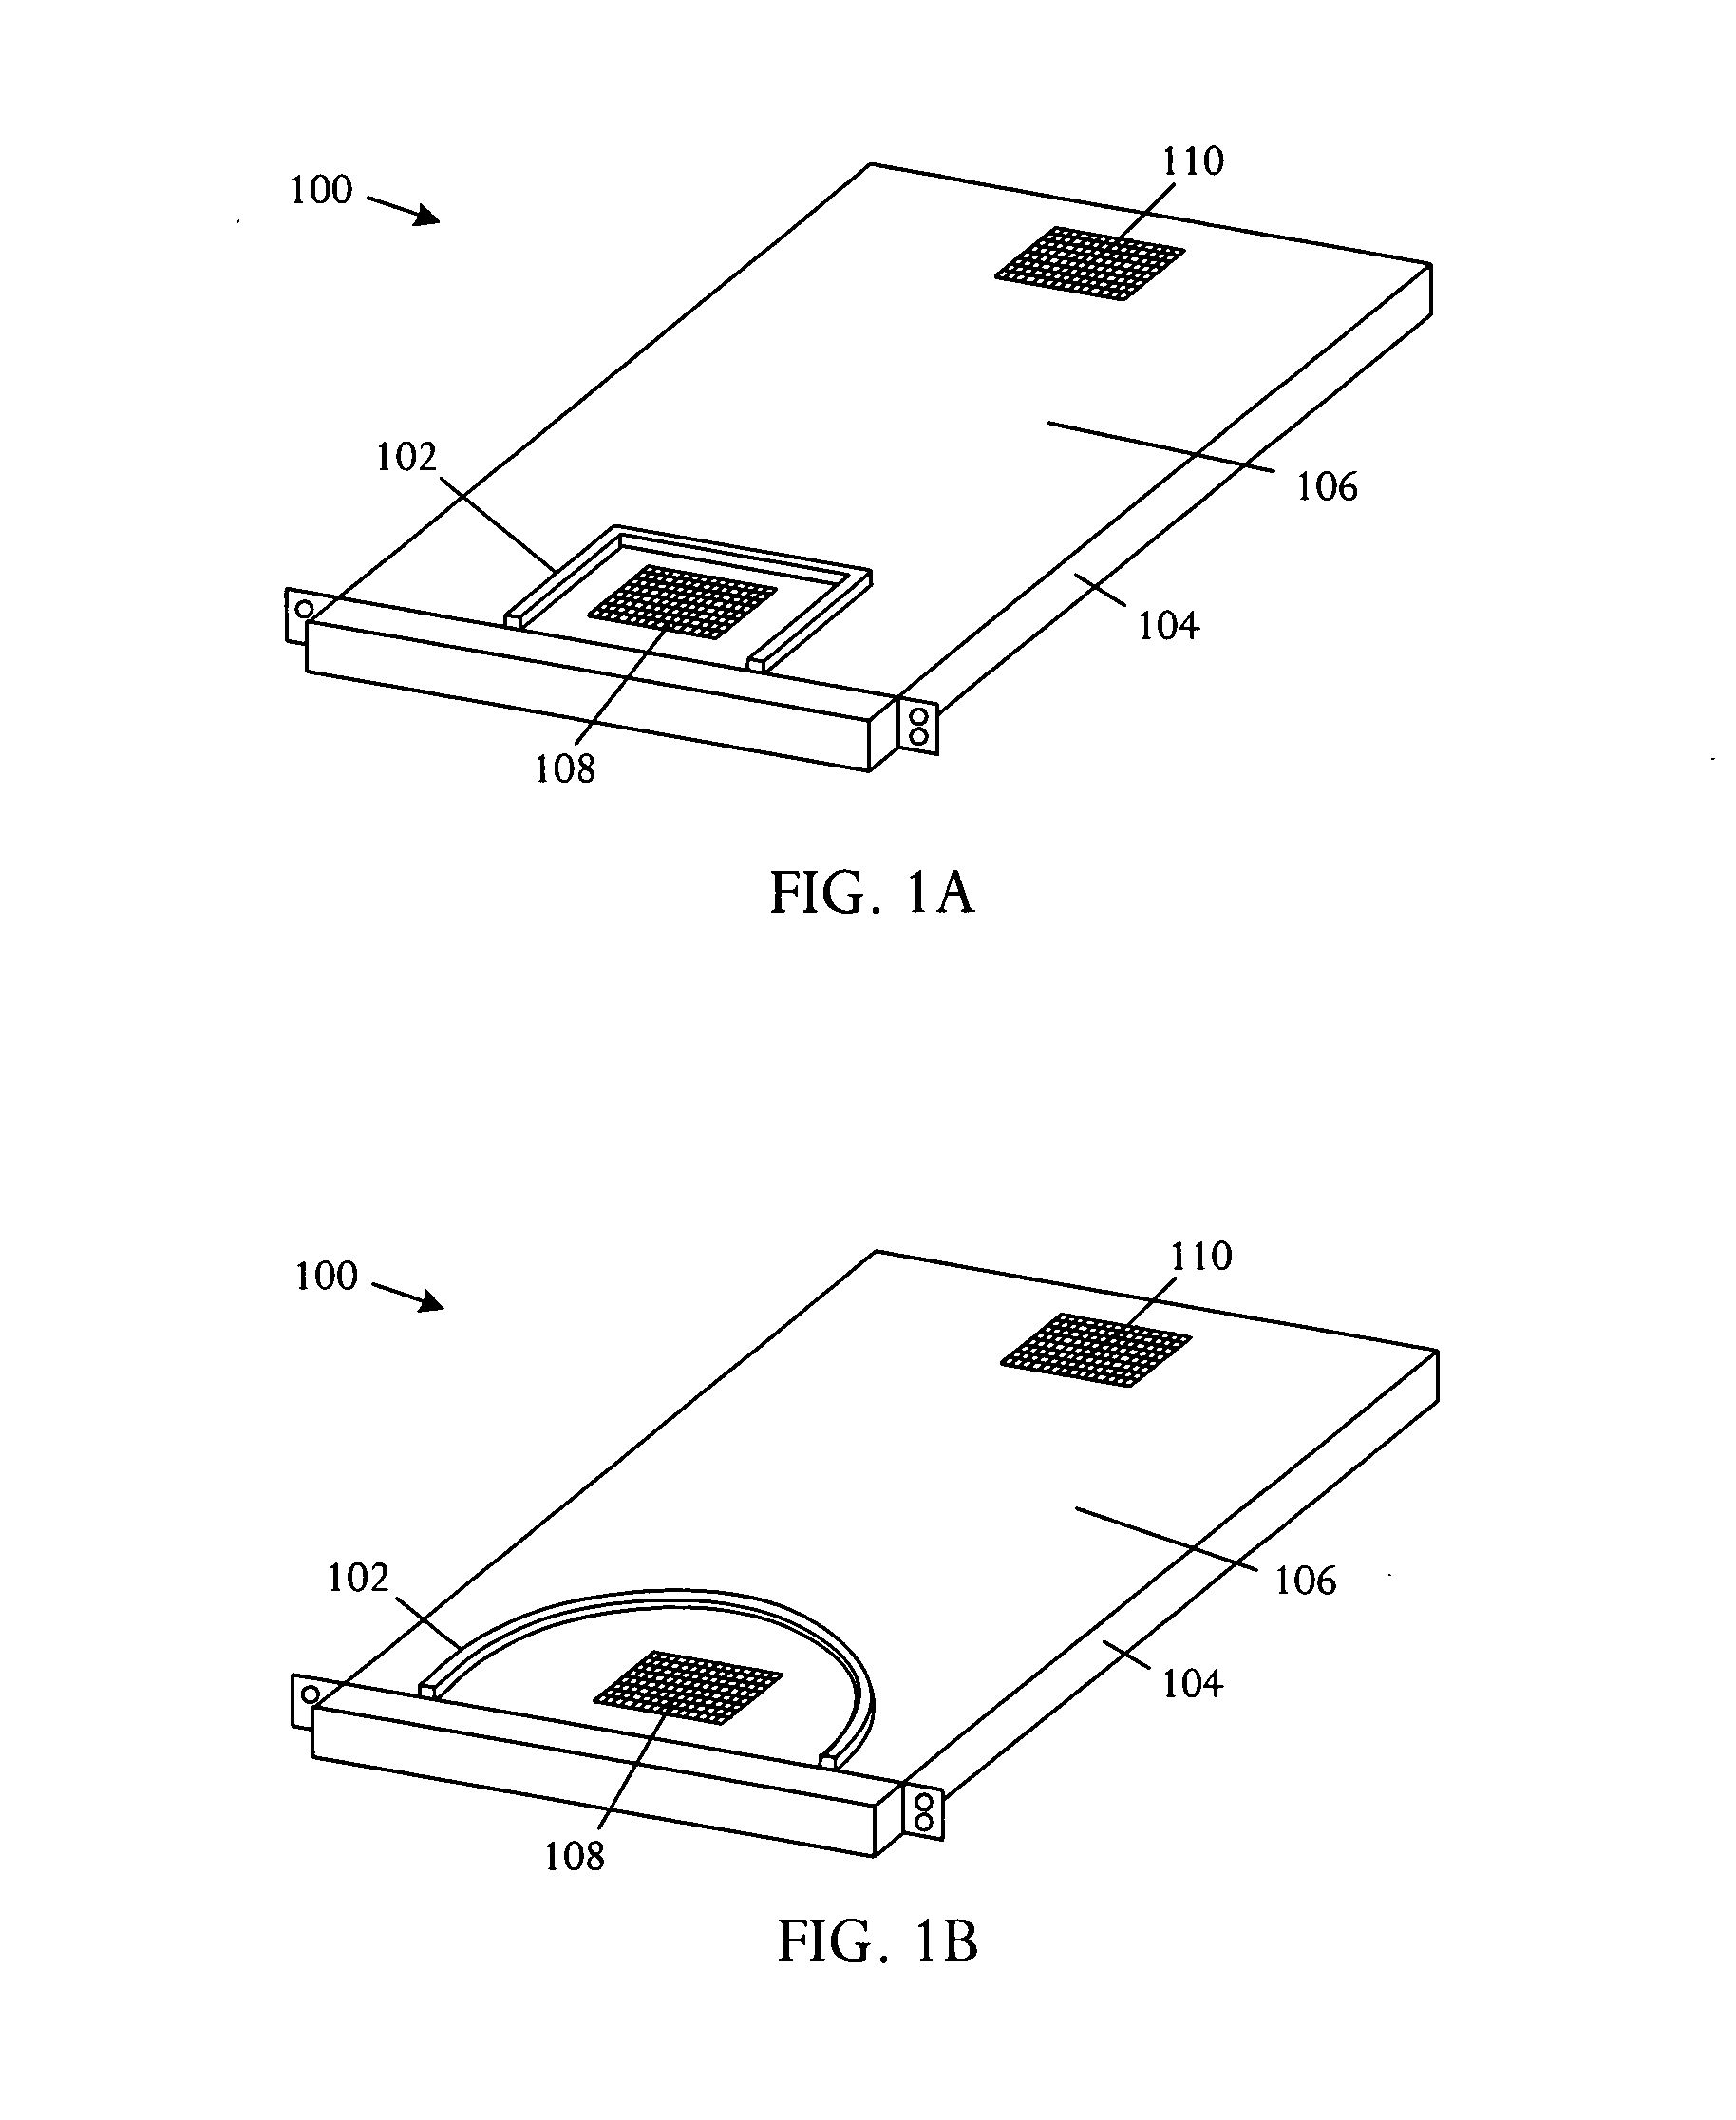 Air baffle for managing cooling air re-circulation in an electronic system